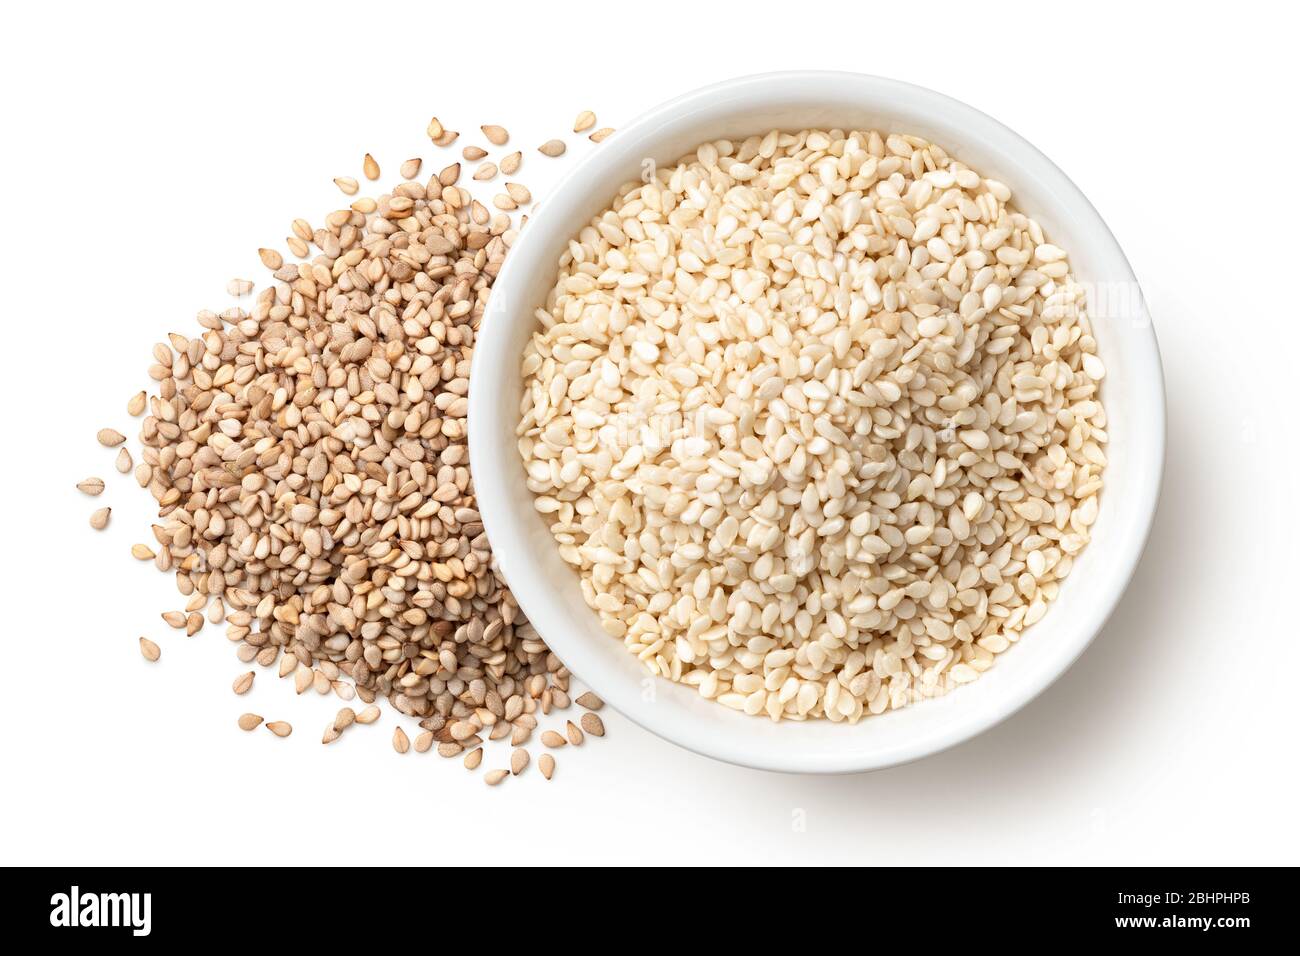 Peeled sesame seeds in a white ceramic bowl next to a pile of unpeeled sesame seeds isolated on white. Top view. Stock Photo